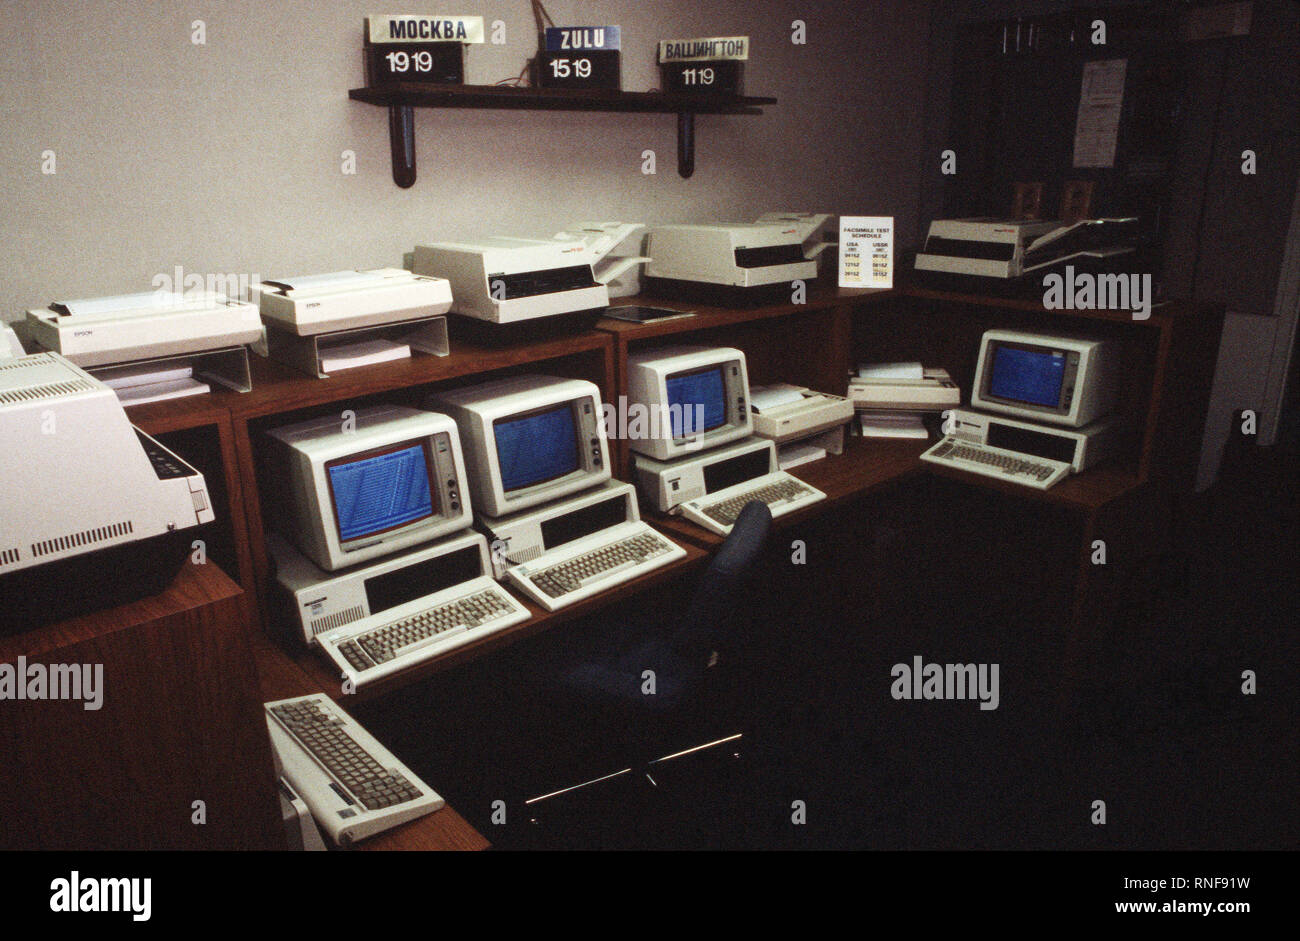 A view of computer stations, printers and facsimile machines that are part of American terminus of the Washington-Moscow Direct Communications Link.  Clocks on the wall give Moscow, Greenwich Mean (Zulu) and local times; a regular facsimile machine test schedule is at right.  The link was established by the US and Soviet governments in 1963 to ensure open lines of communication during potential crisis situations and reduce the risk of accidental war. Stock Photo